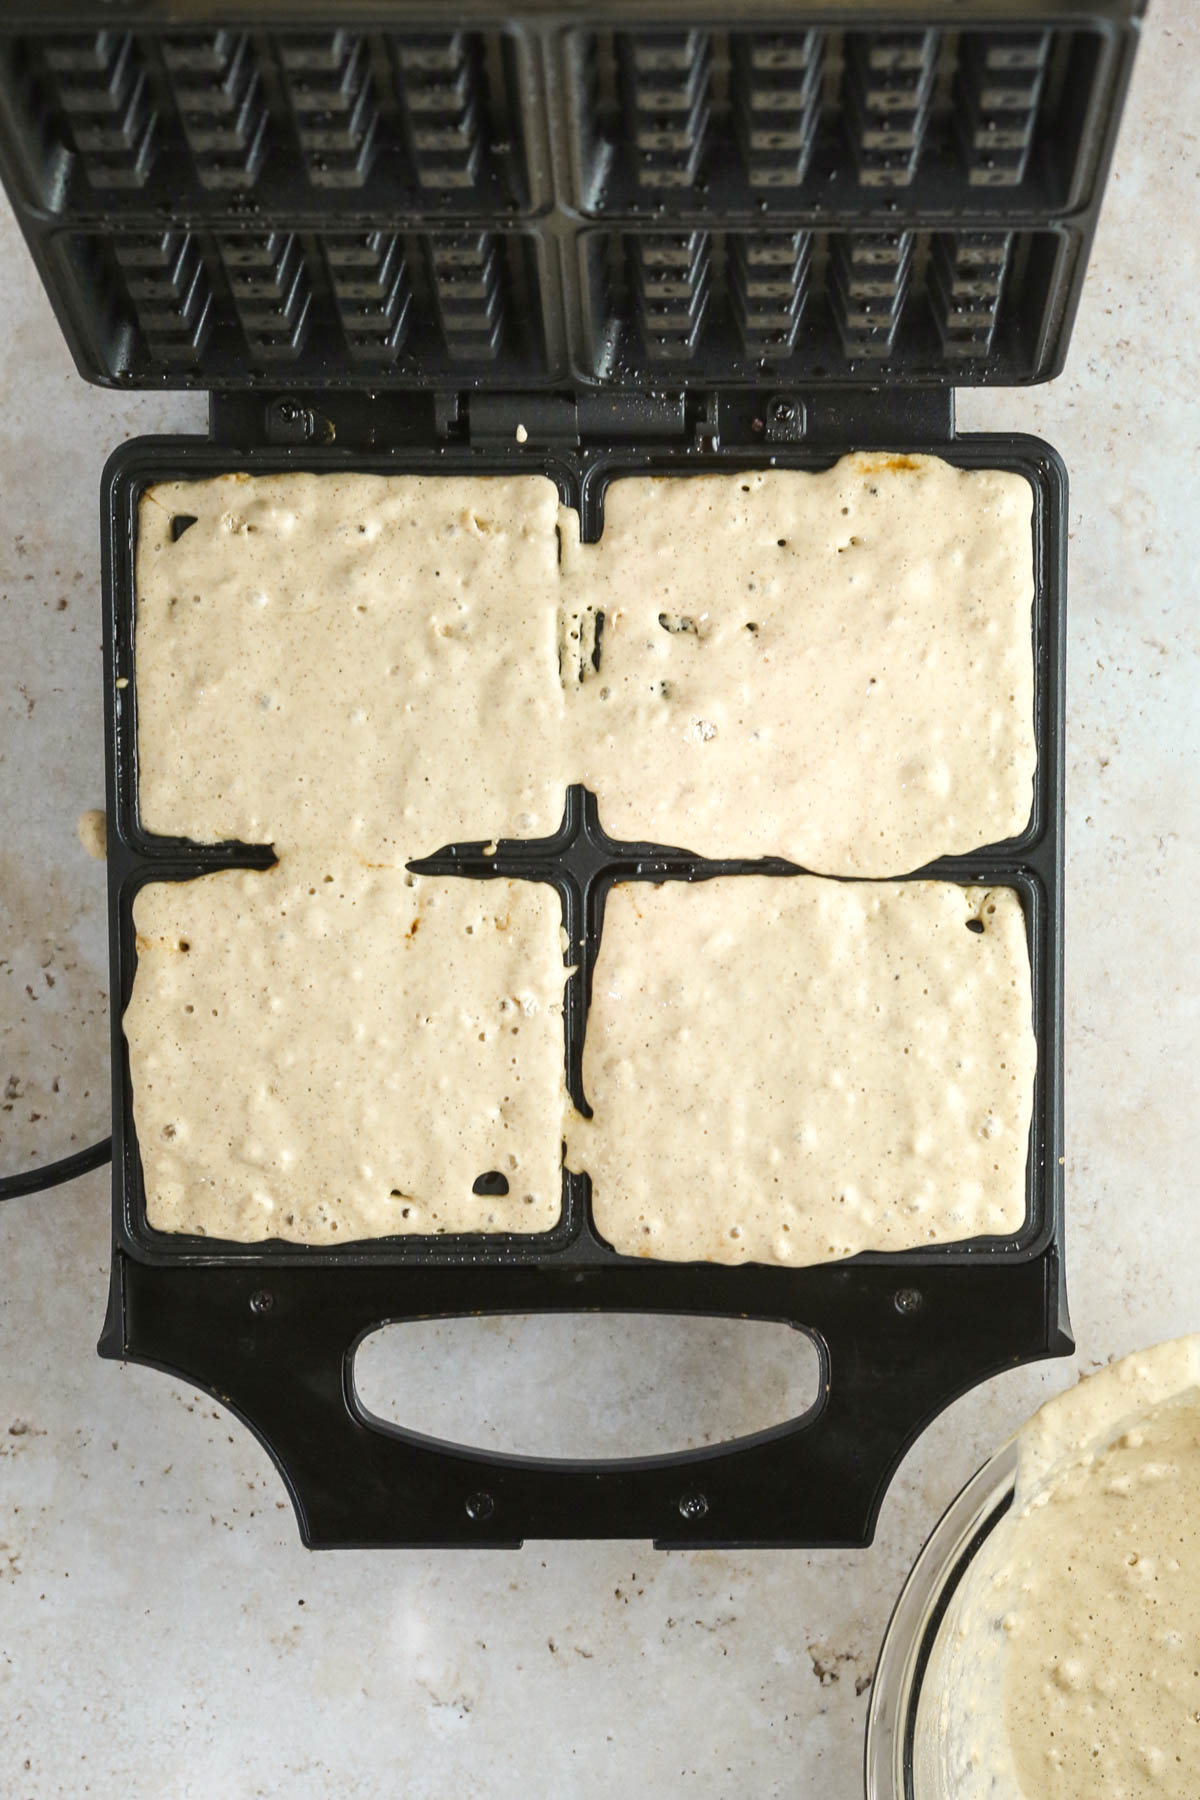 adding waffle batter to the waffle iron, shown from above.